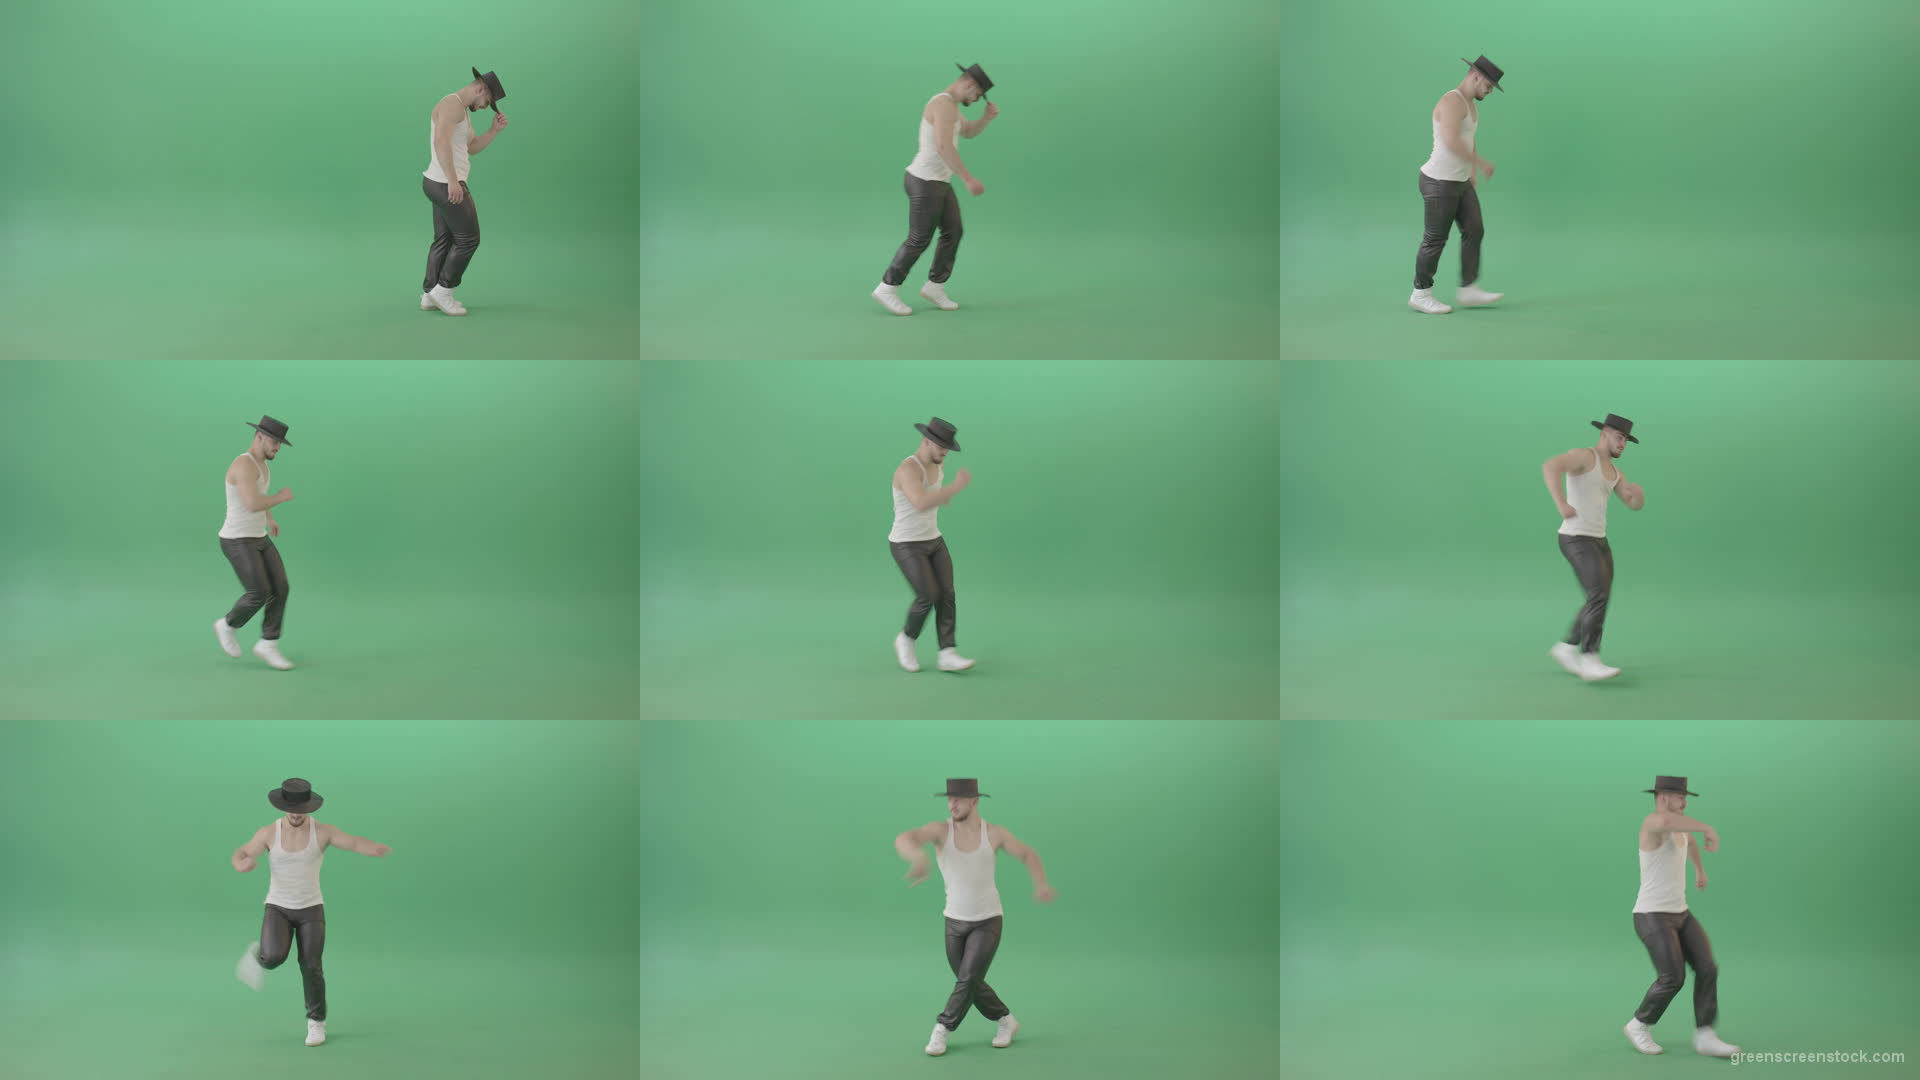 Adult-Man-makes-moonwalk-and-dancing-Pop-isolated-on-Green-Screen-4K-Video-Footage-1920 Green Screen Stock